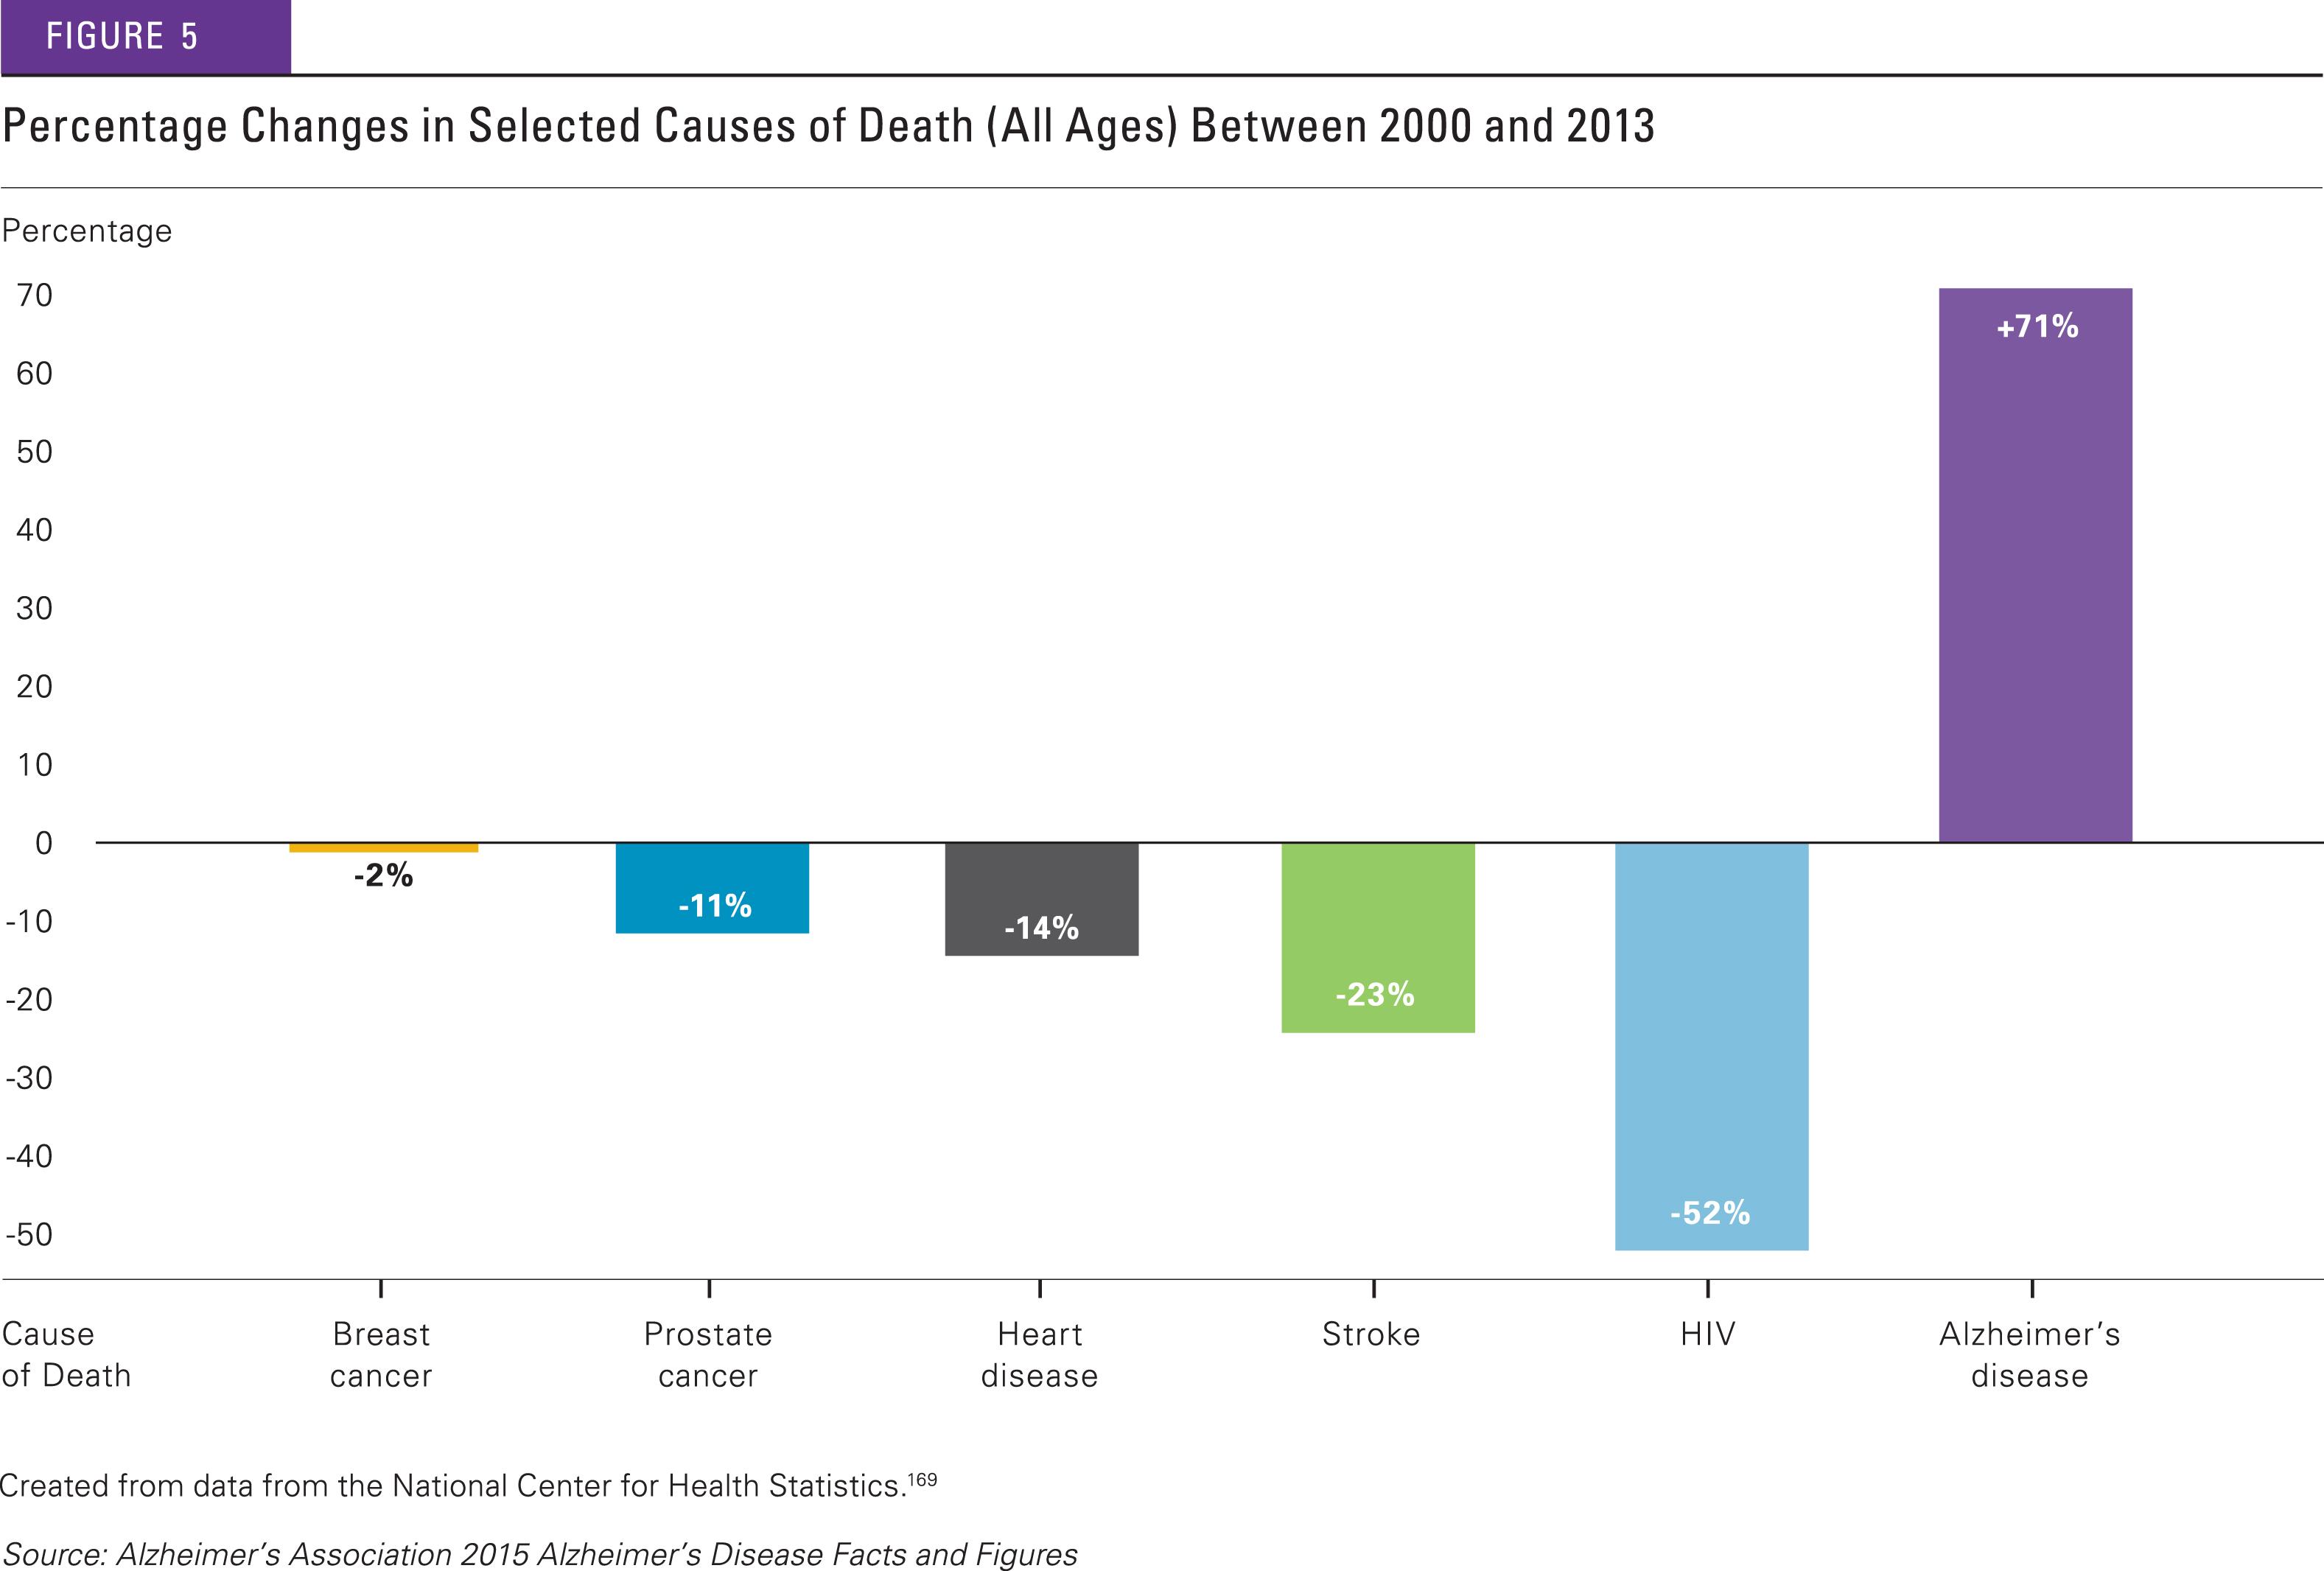 alz_2015ff_fig5_percentage-changes-in-selected-causes-of-death